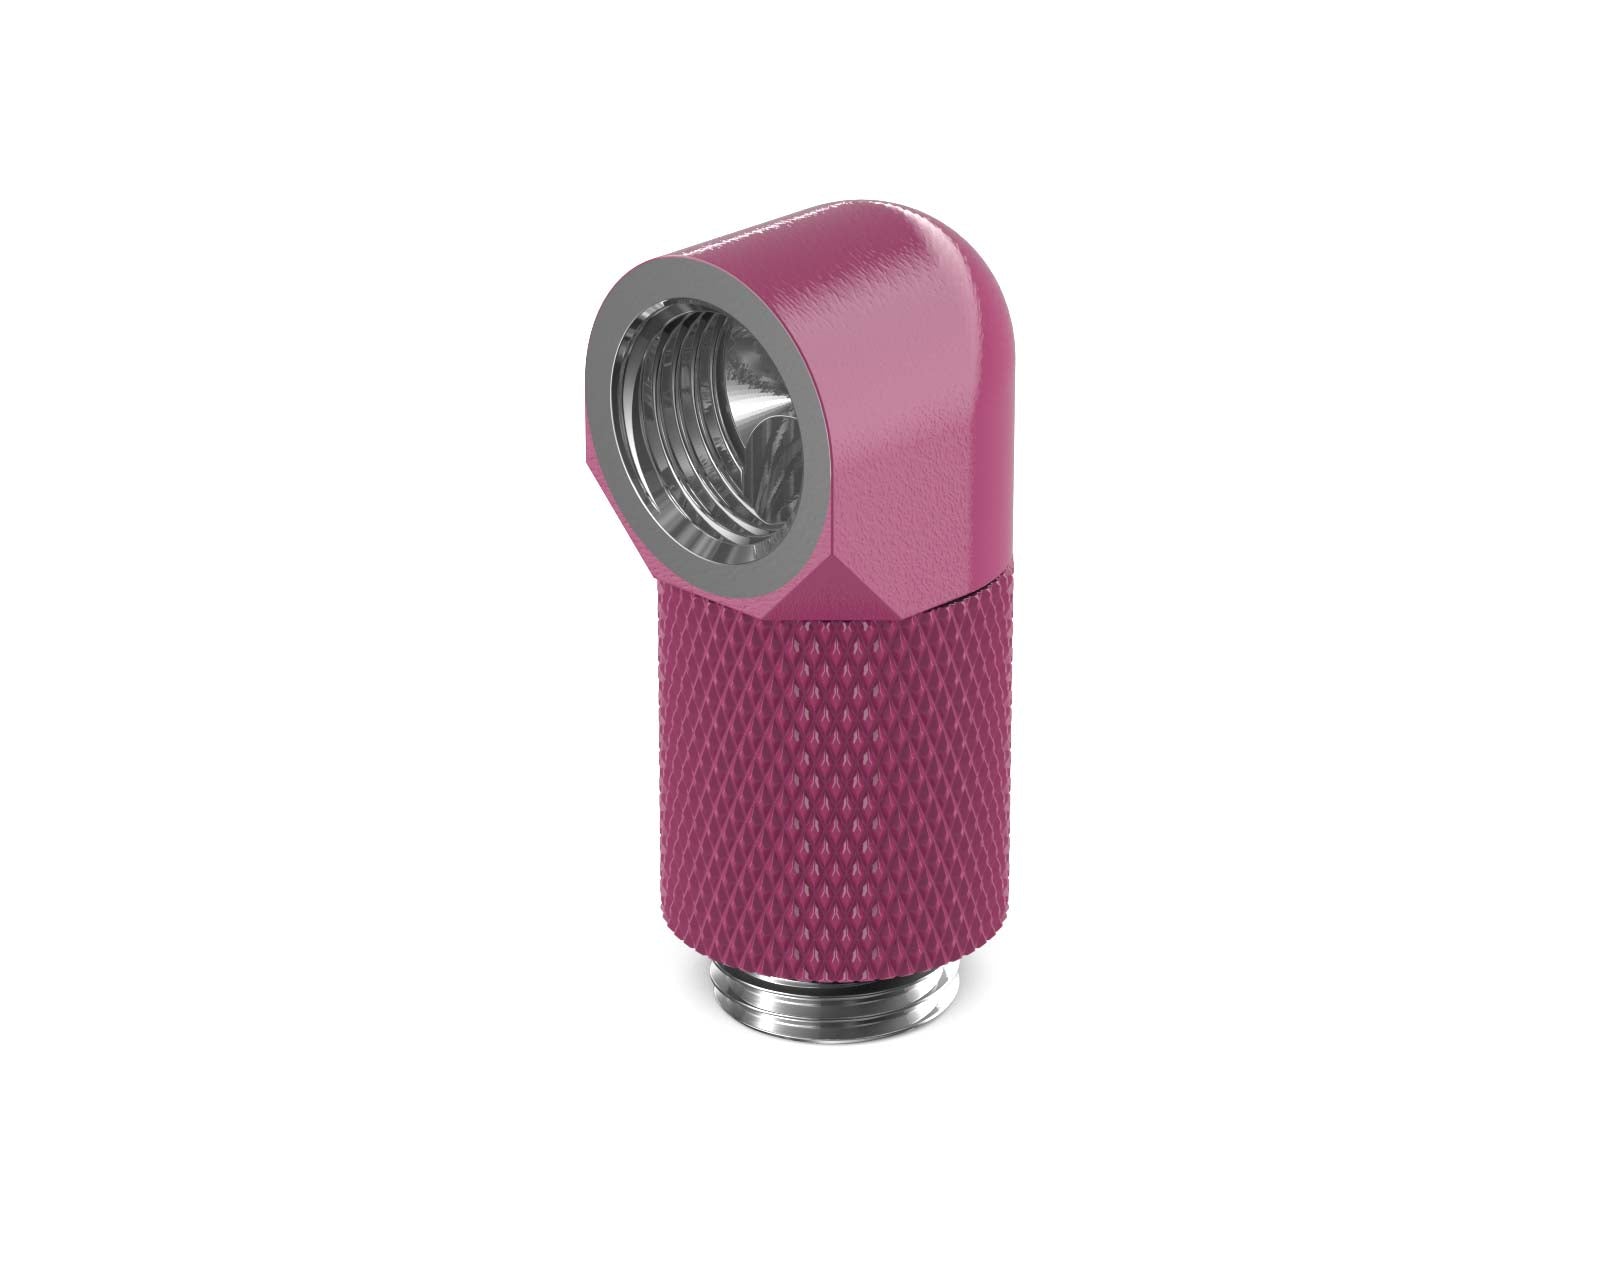 PrimoChill Male to Female G 1/4in. 90 Degree SX Rotary 20mm Extension Elbow Fitting - PrimoChill - KEEPING IT COOL Magenta